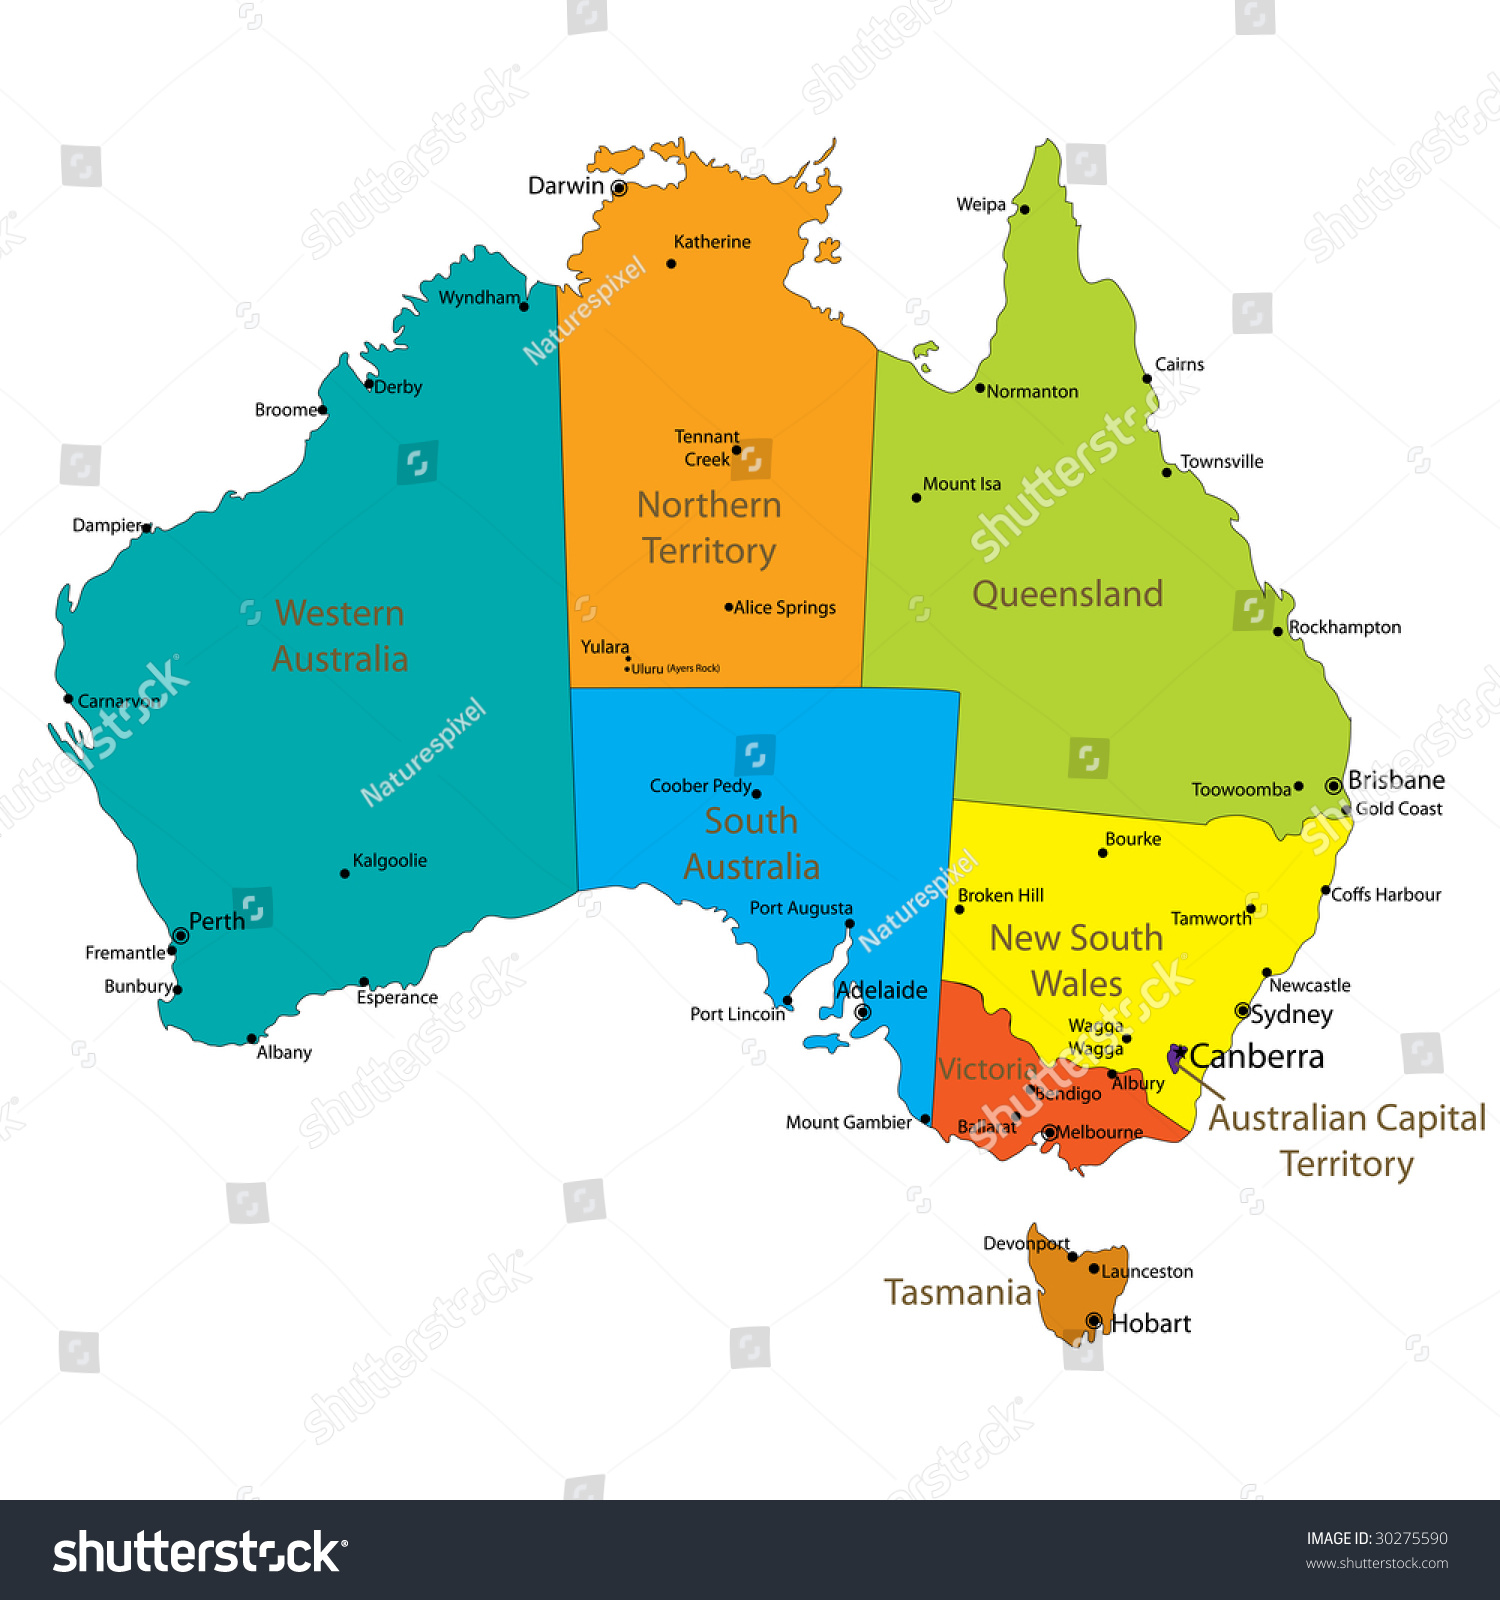 Map Of Australia With Towns And Cities - DIAAAART